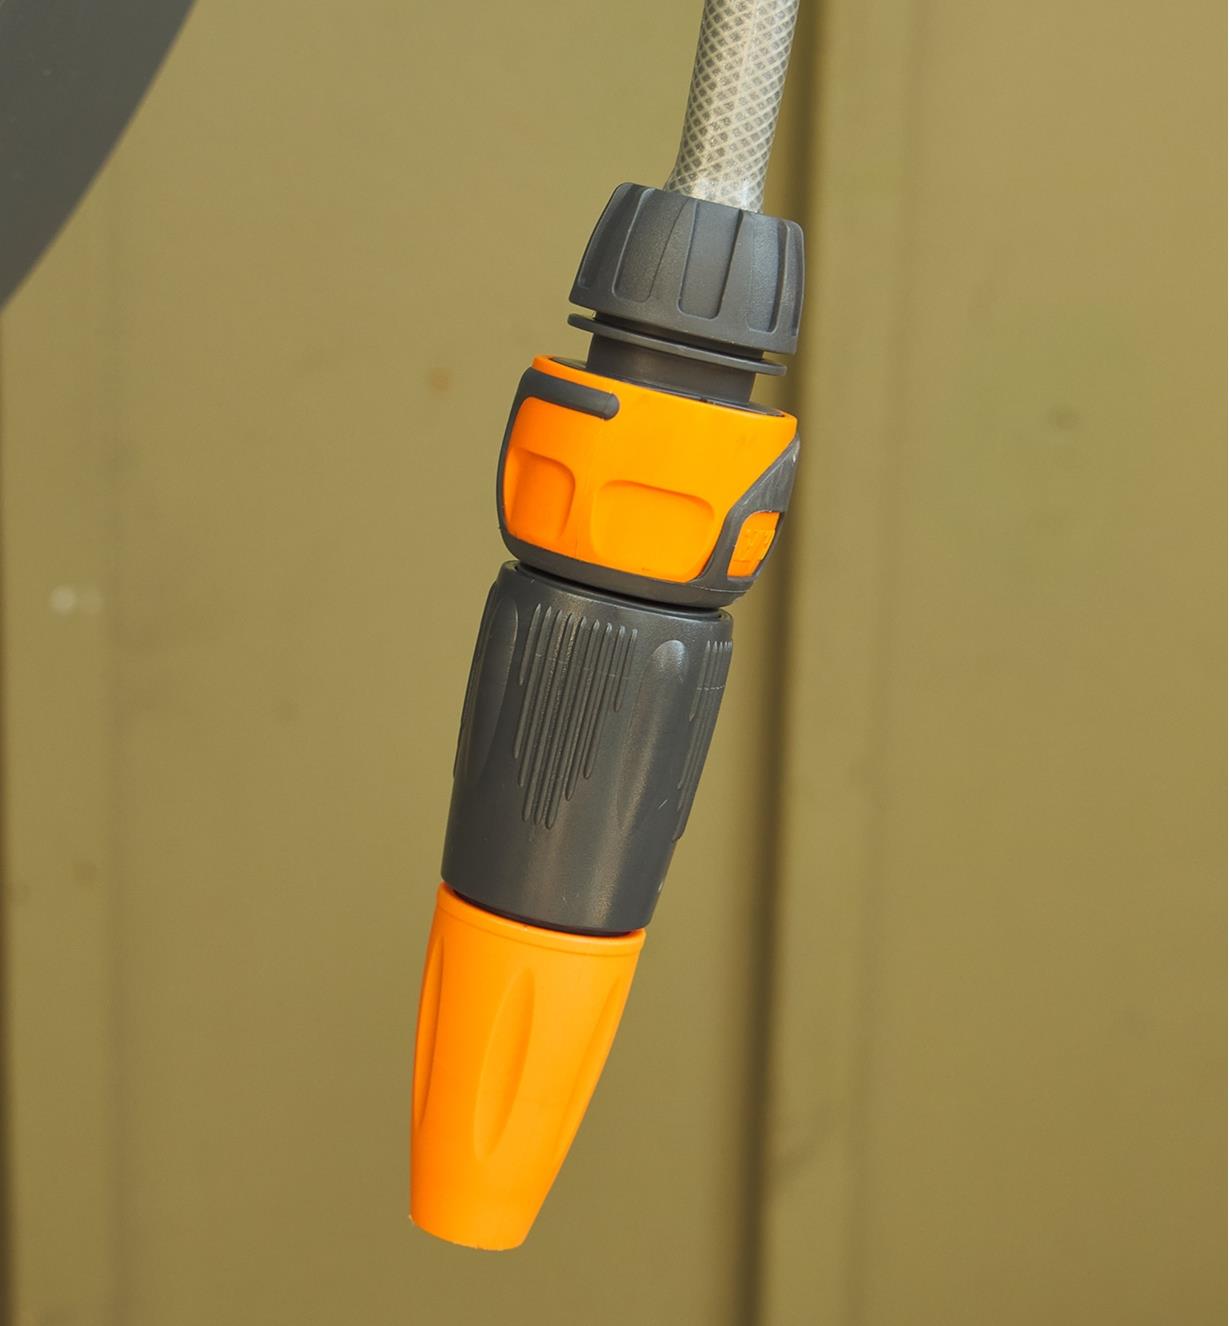 A spray gun connected to a hose hangs from the hose reel